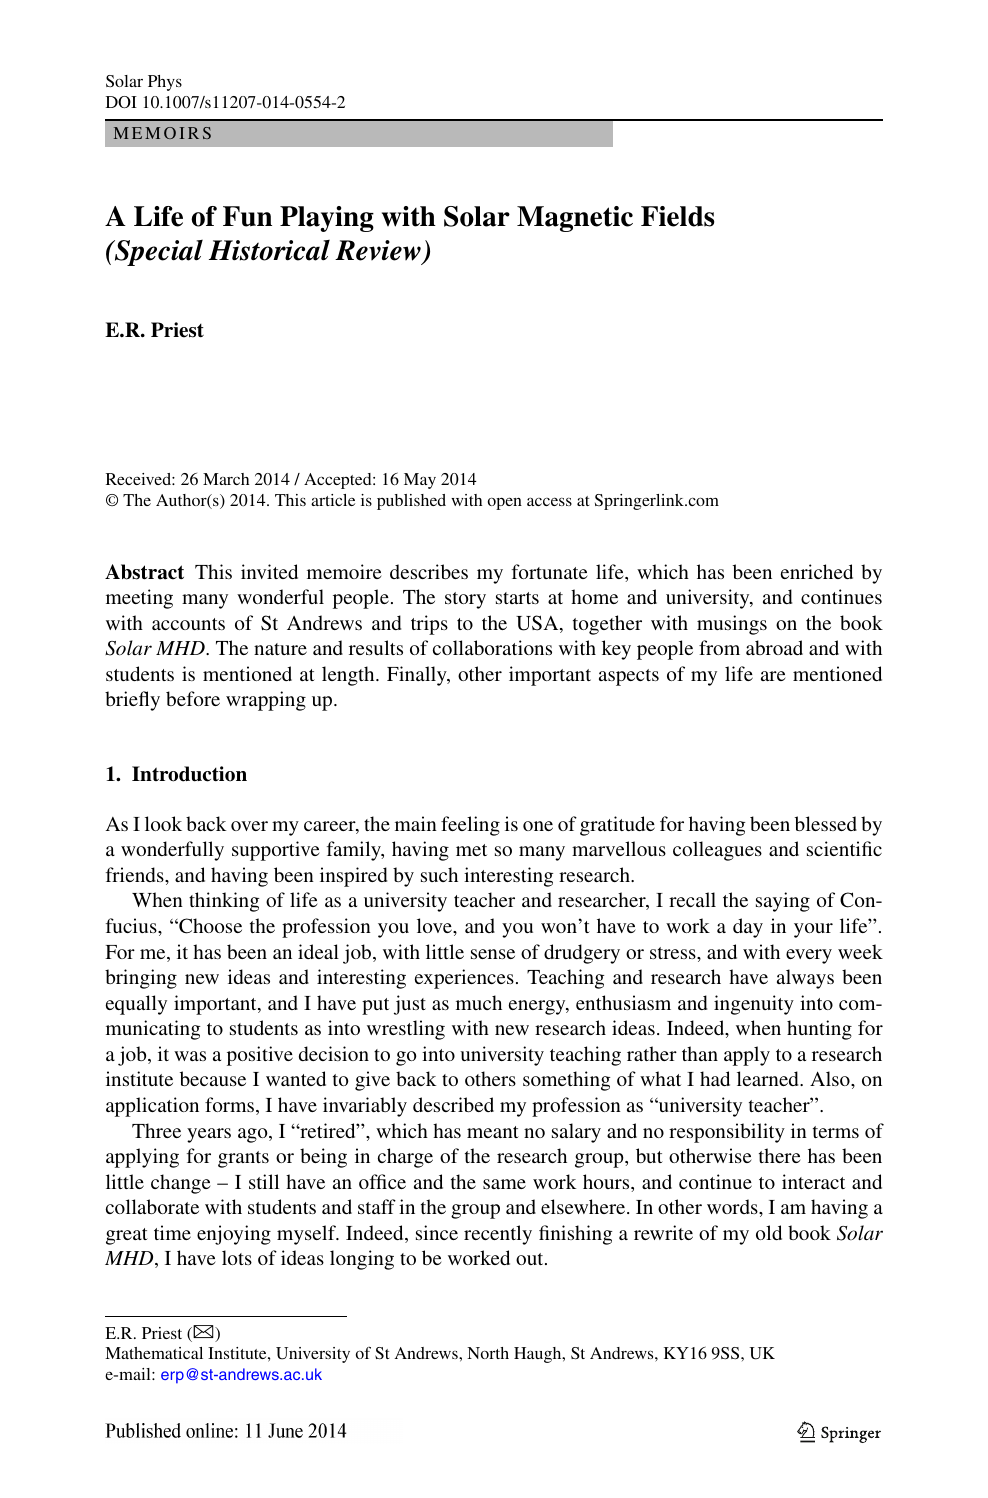 Judgement and Planning in Chess.pdf - The Fellowship